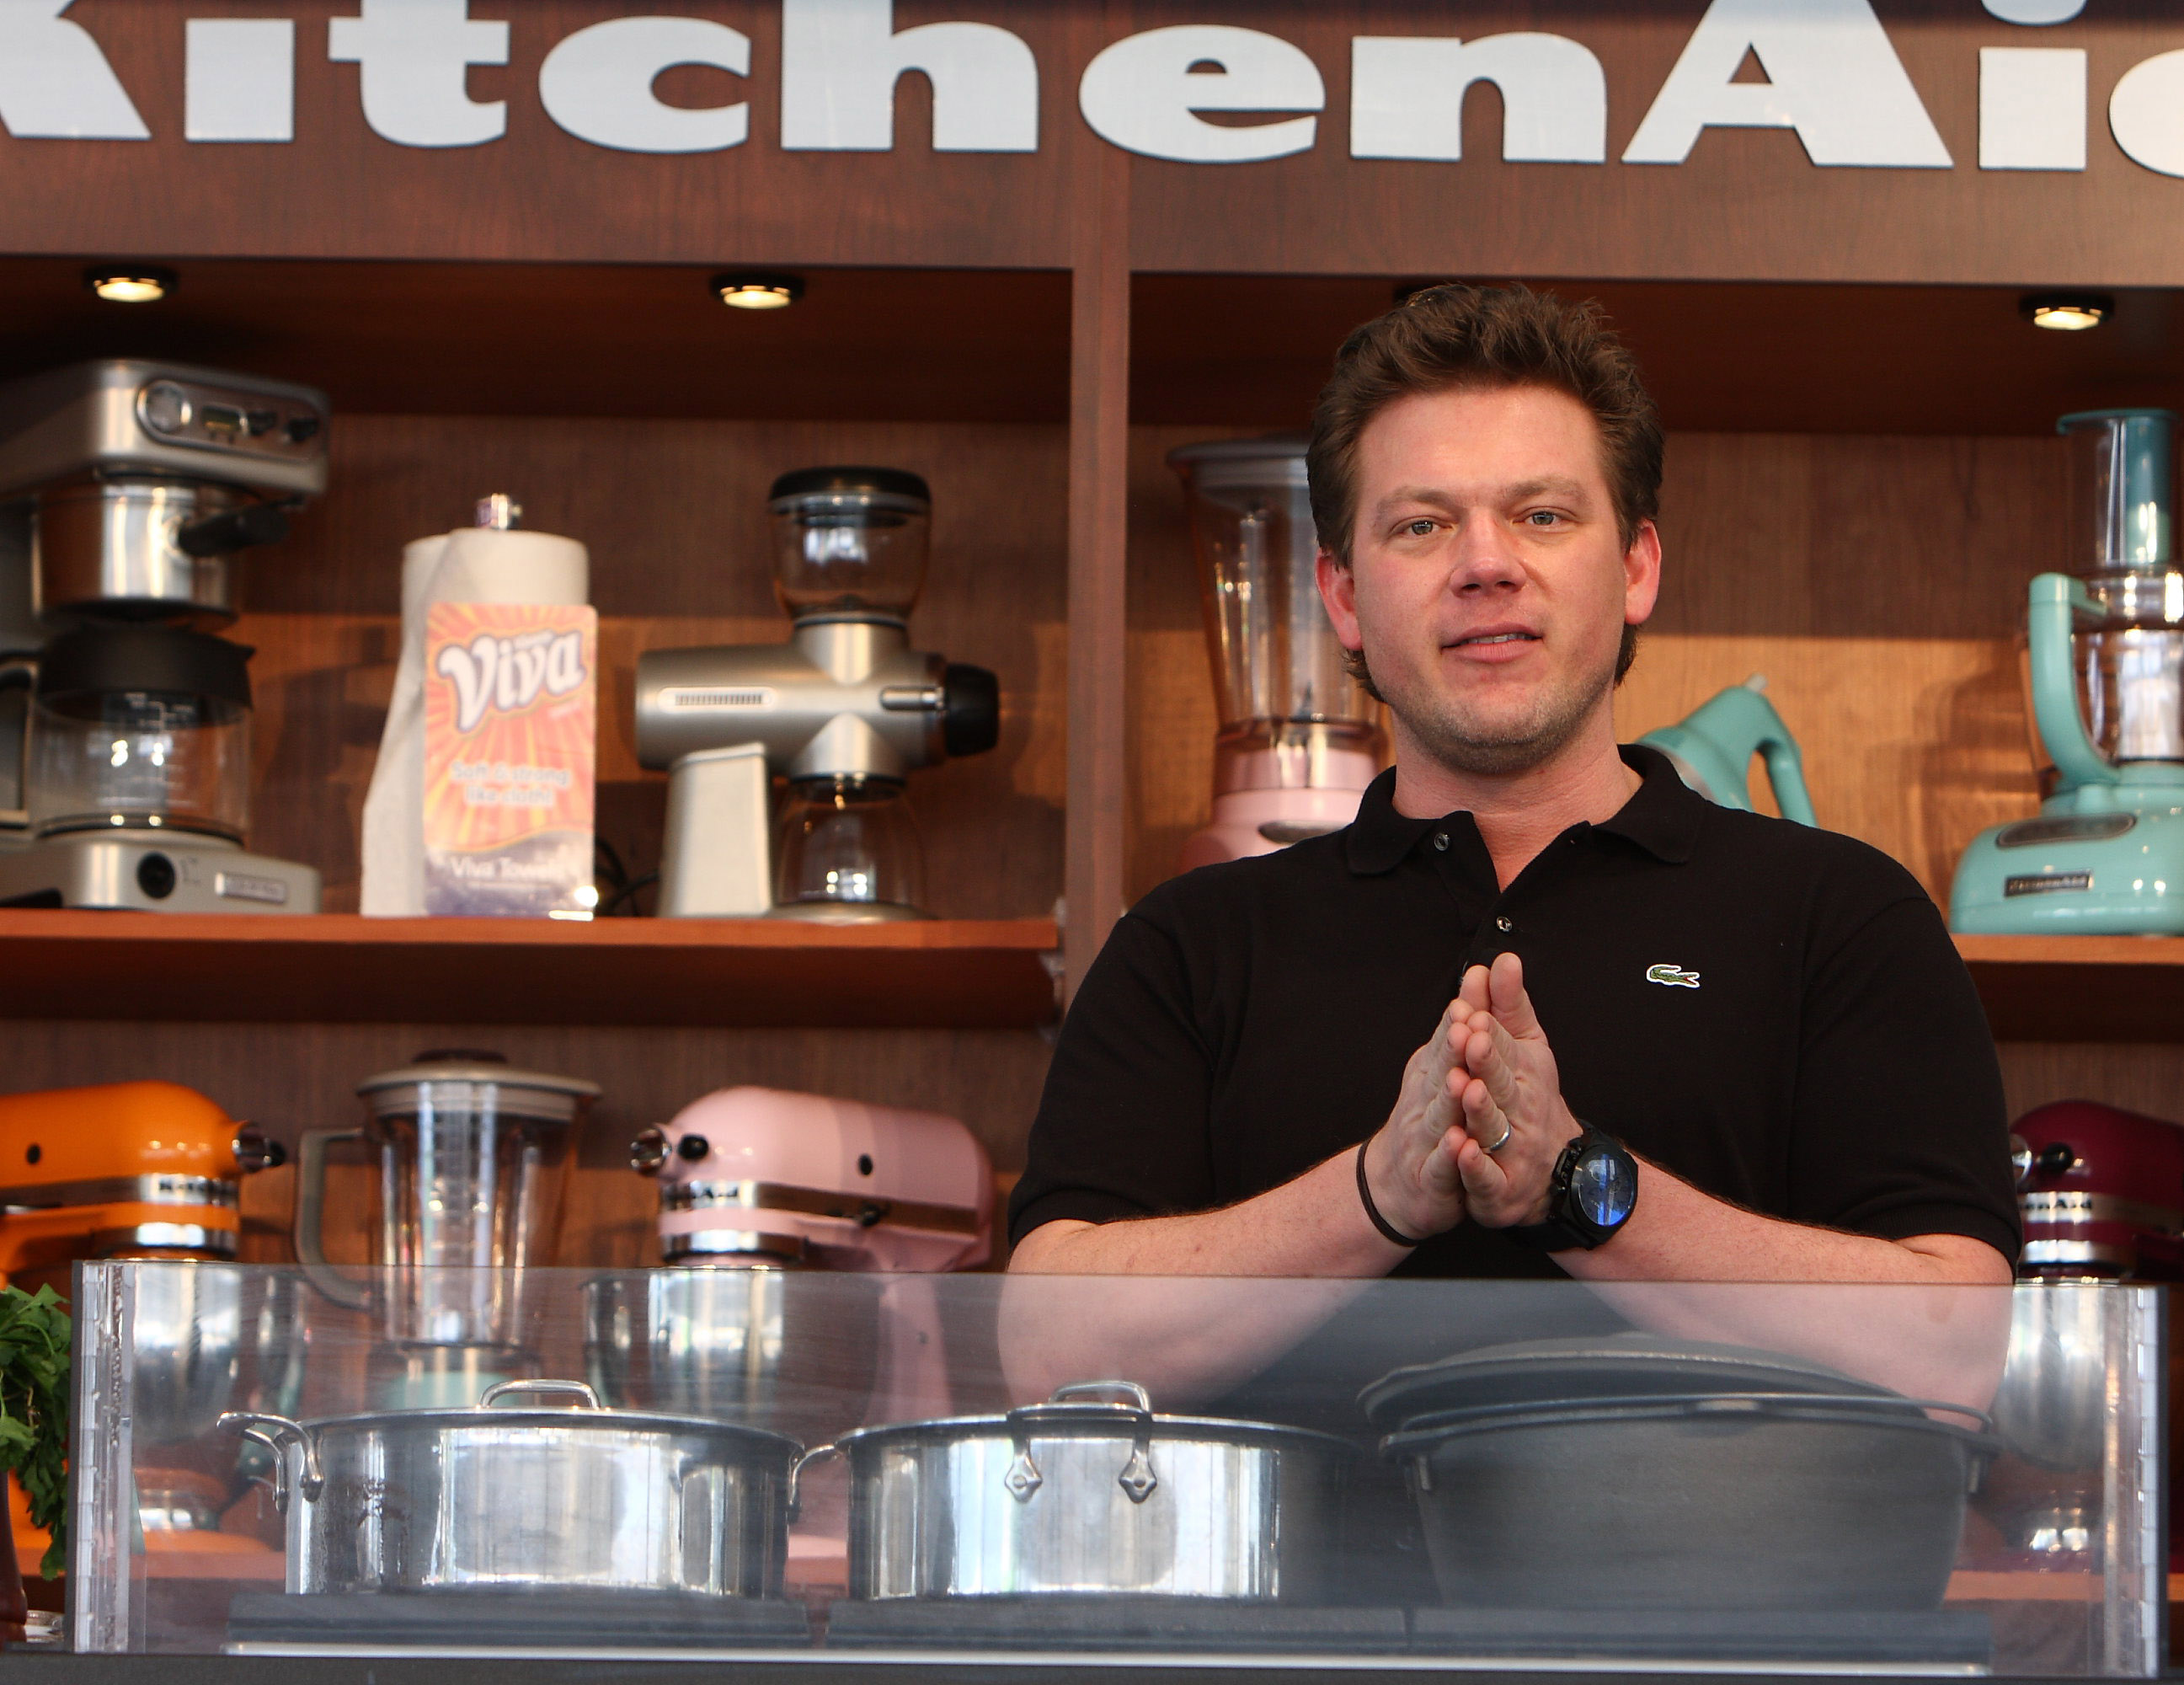 Chef Tyler Florence wears a long-sleeved black top in this photograph.